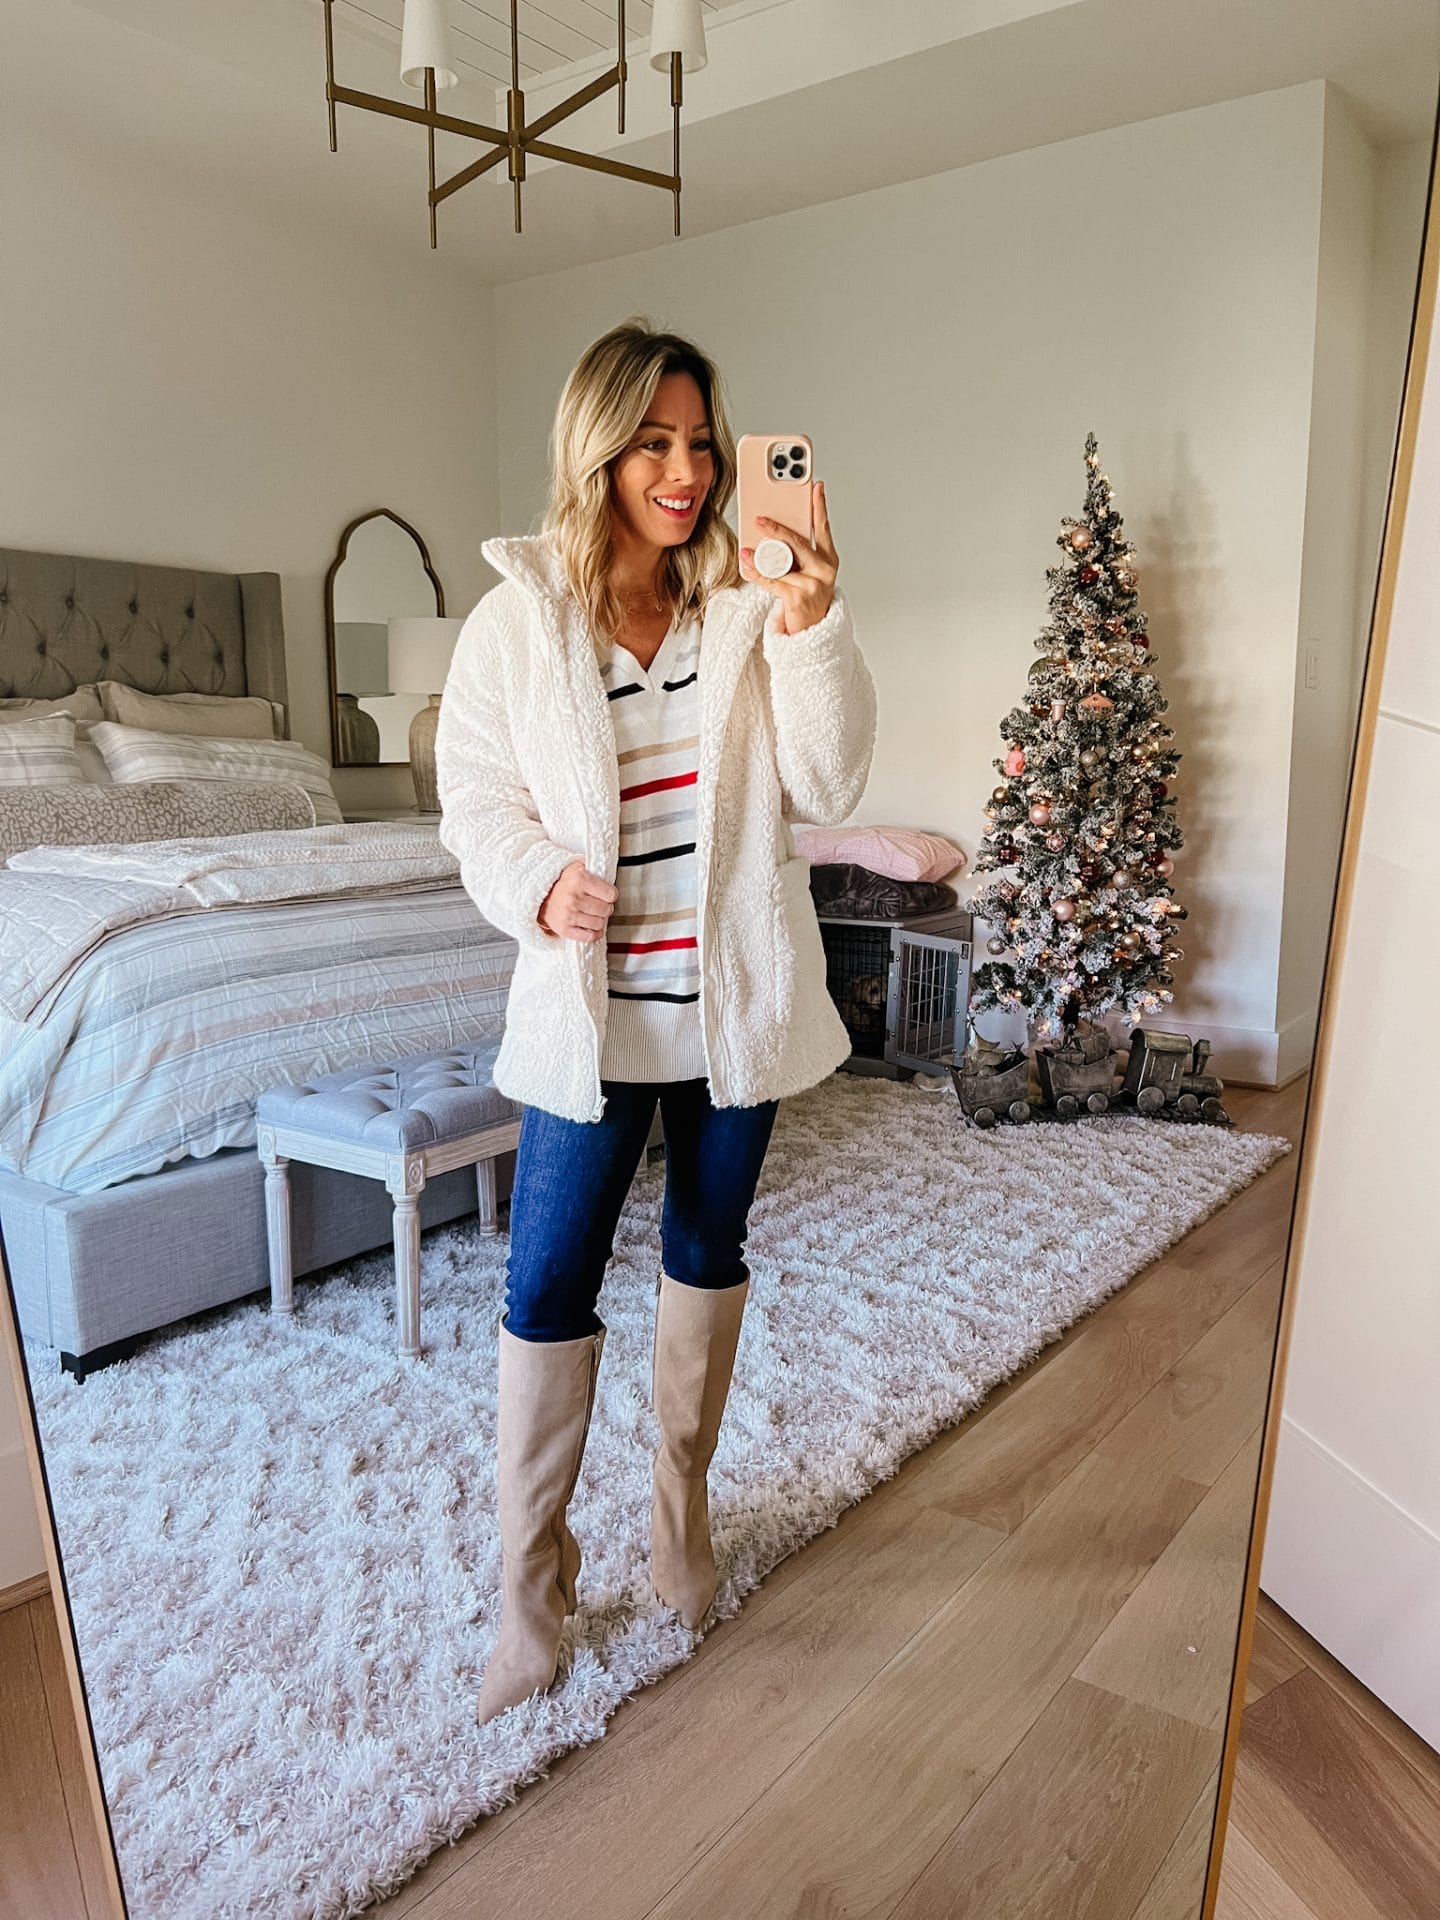 Striped Tunic Sweater, Jeans, Boots 